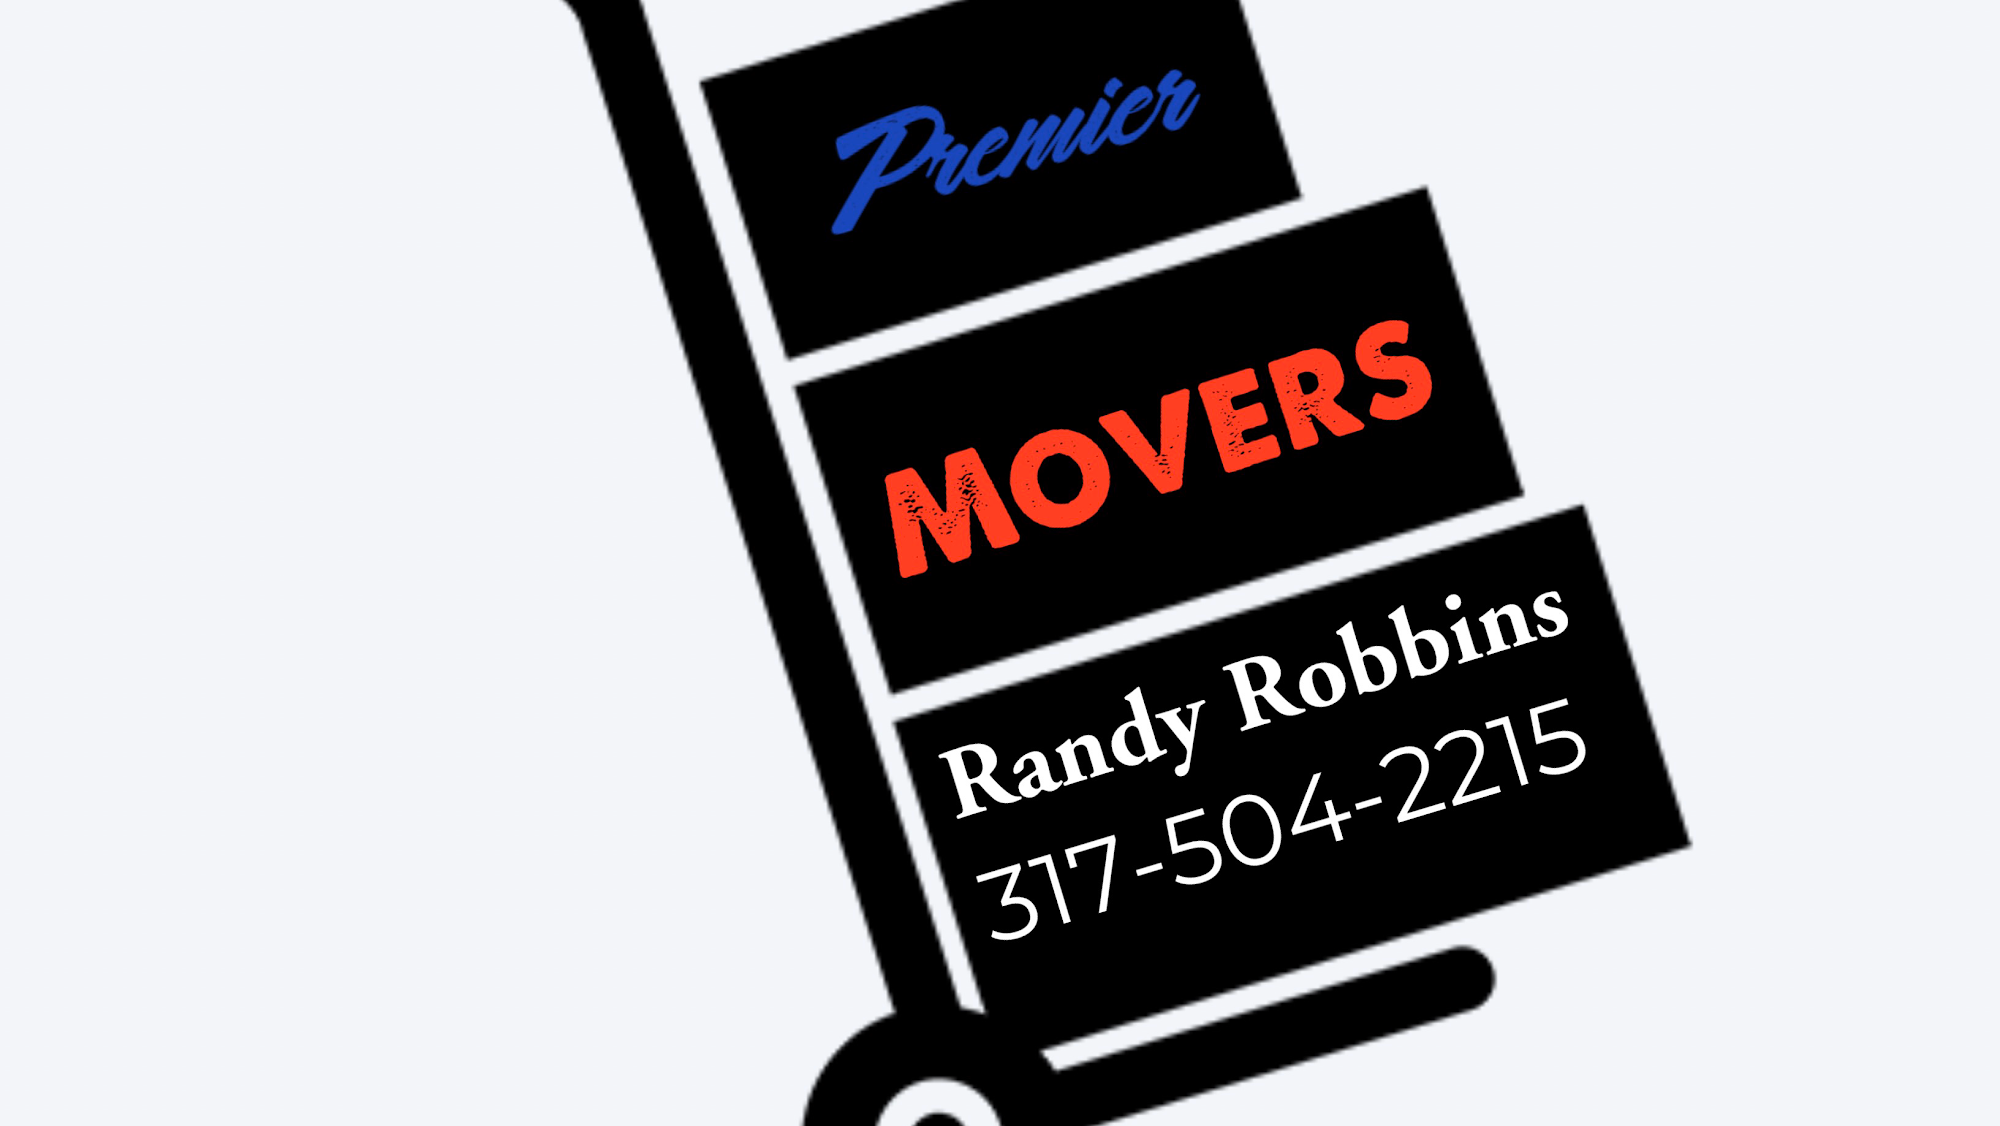 Premiere Movers 6031 Schoolwood Dr, Speedway Indiana 46224